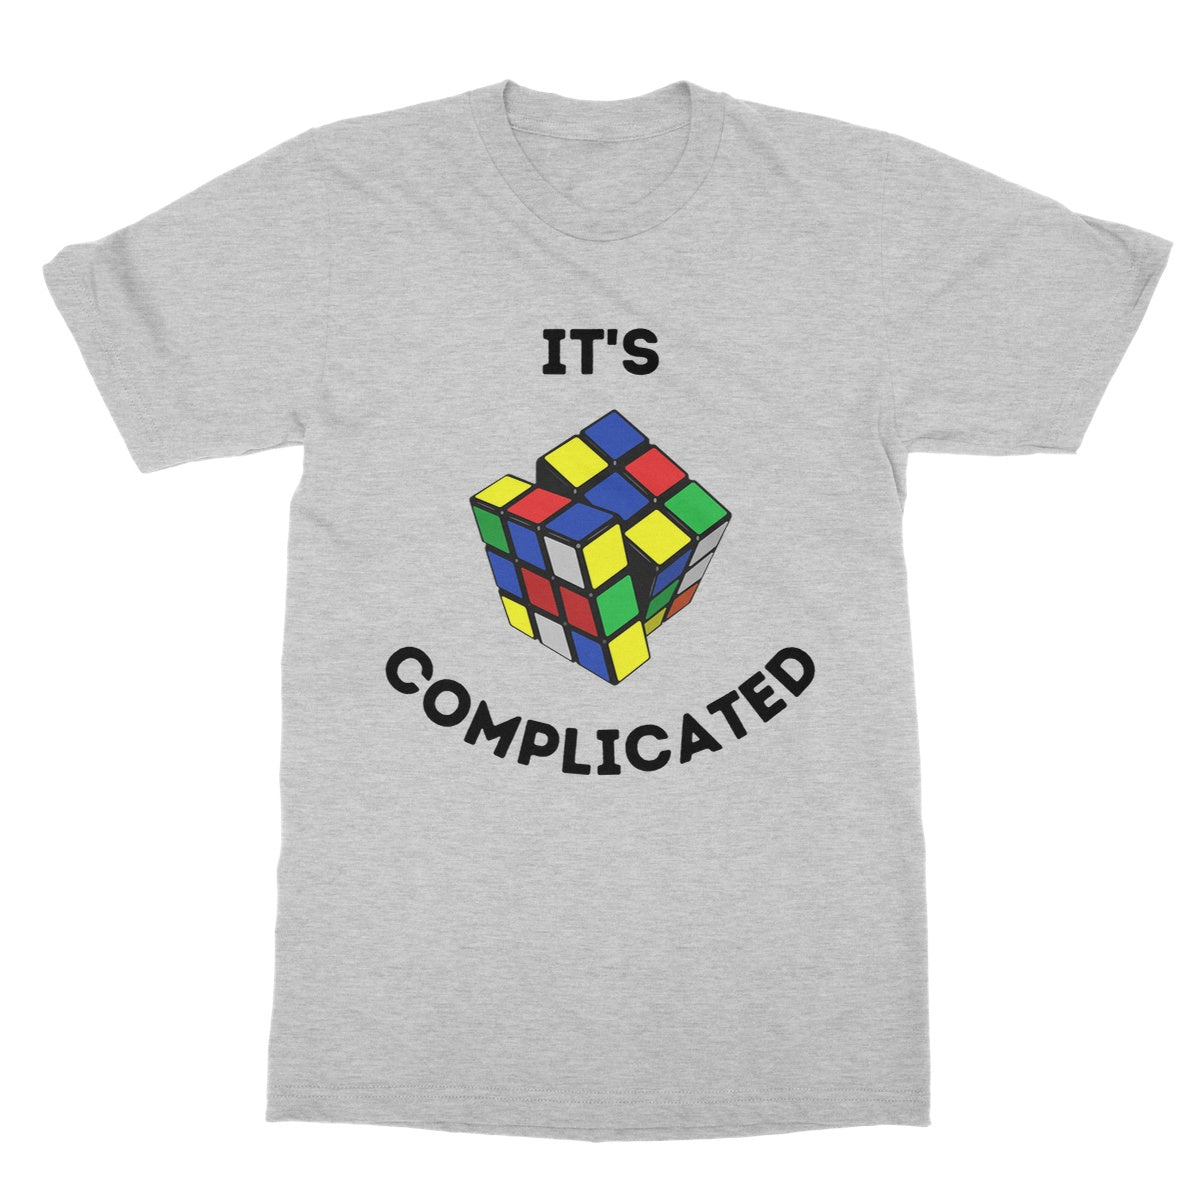 it's complicated t shirt grey